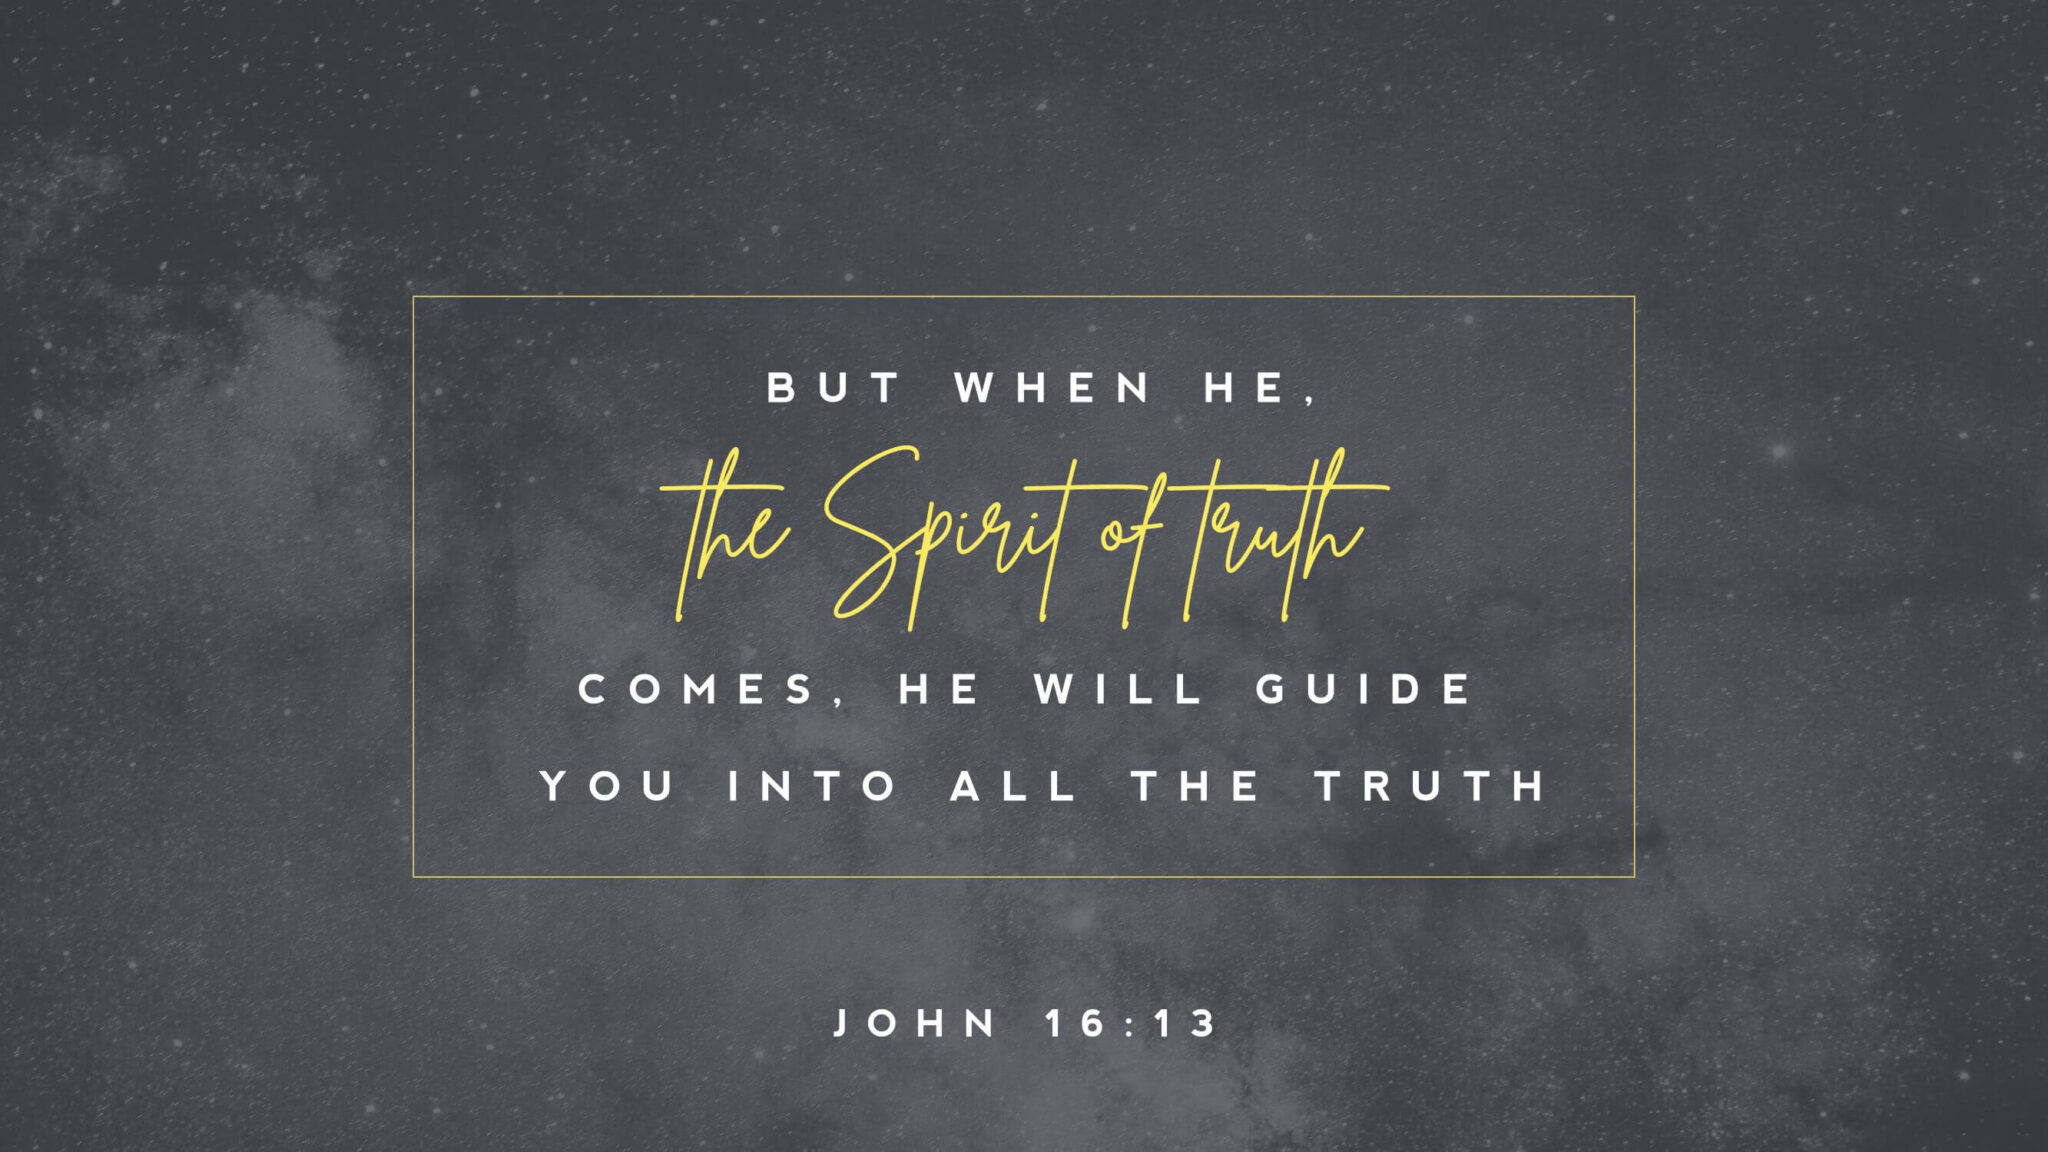 A picture of a starry sky with words overtop that reads "But when He, The Spirit of Truth comes, he will guide you into all the truth." (John 16:13)